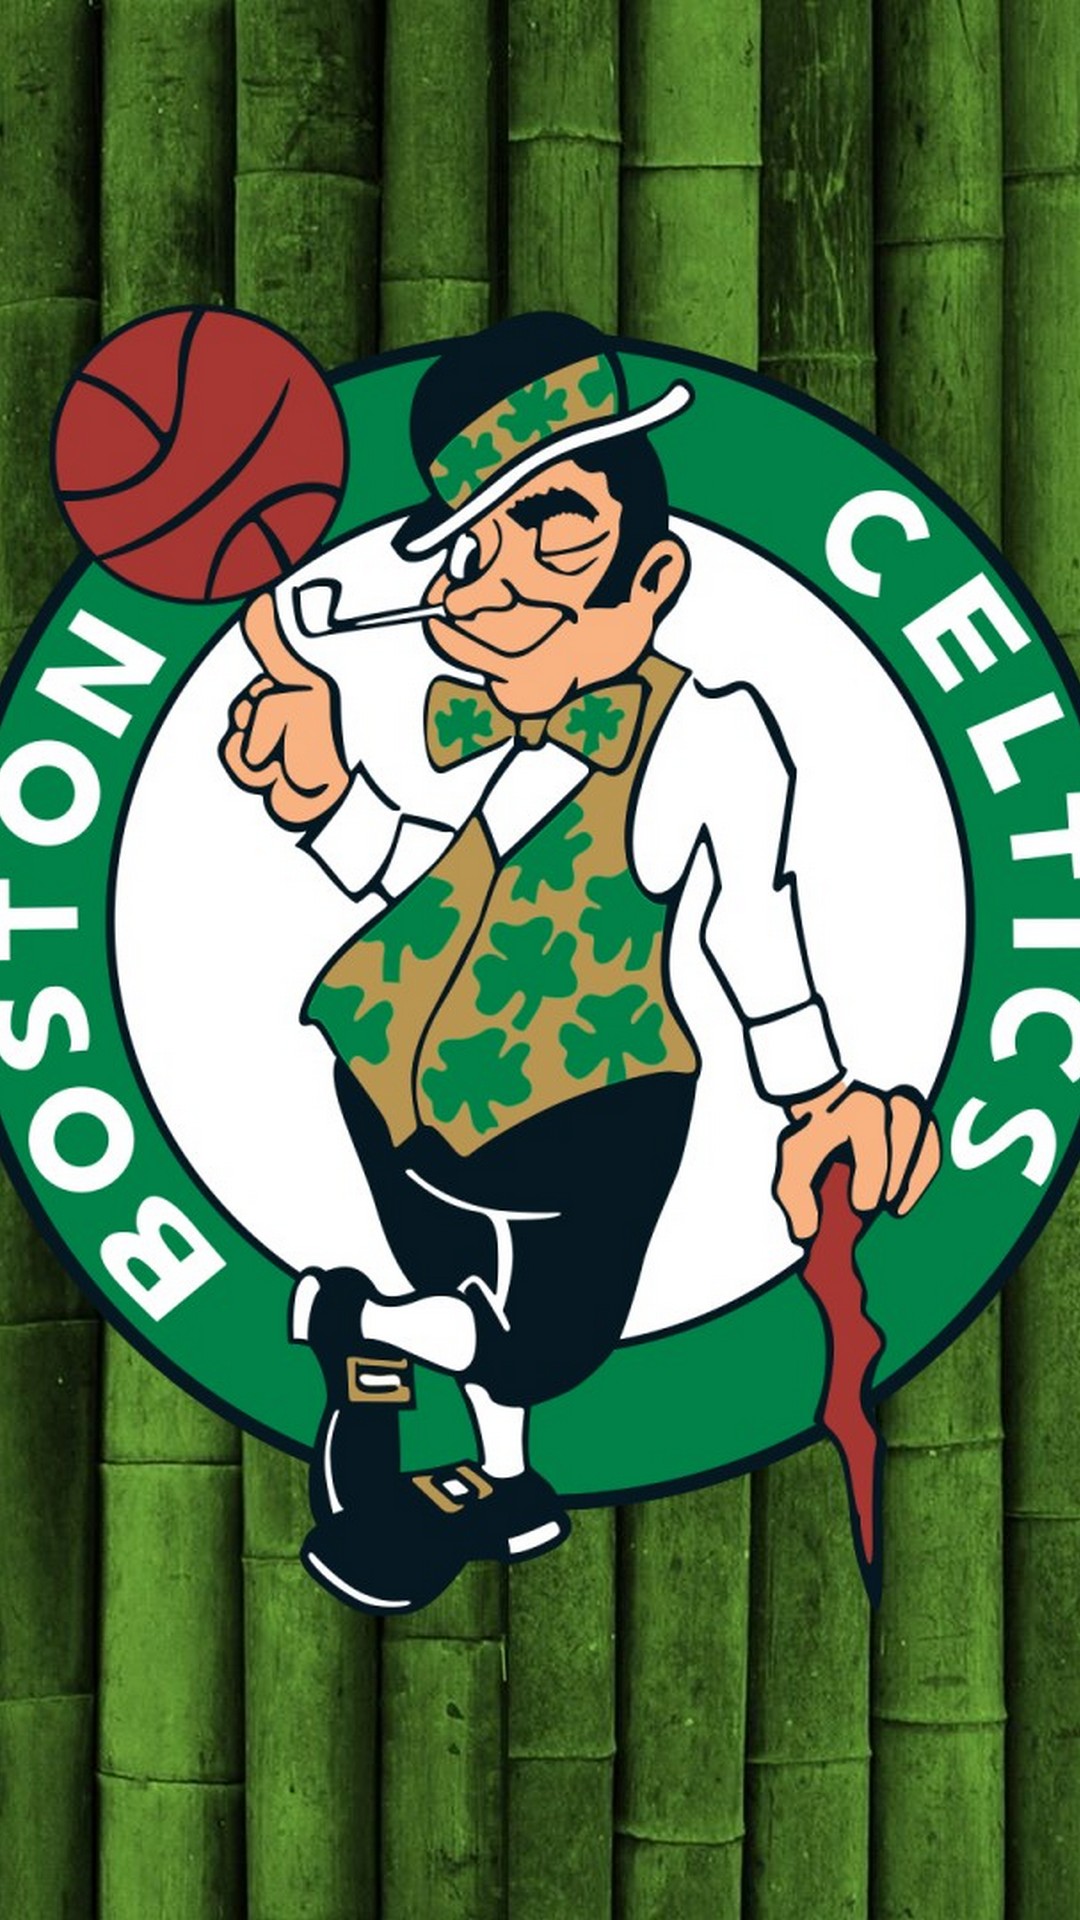 iPhone X Wallpaper Boston Celtics with image resolution 1080x1920 pixel. You can make this wallpaper for your iPhone 5, 6, 7, 8, X backgrounds, Mobile Screensaver, or iPad Lock Screen